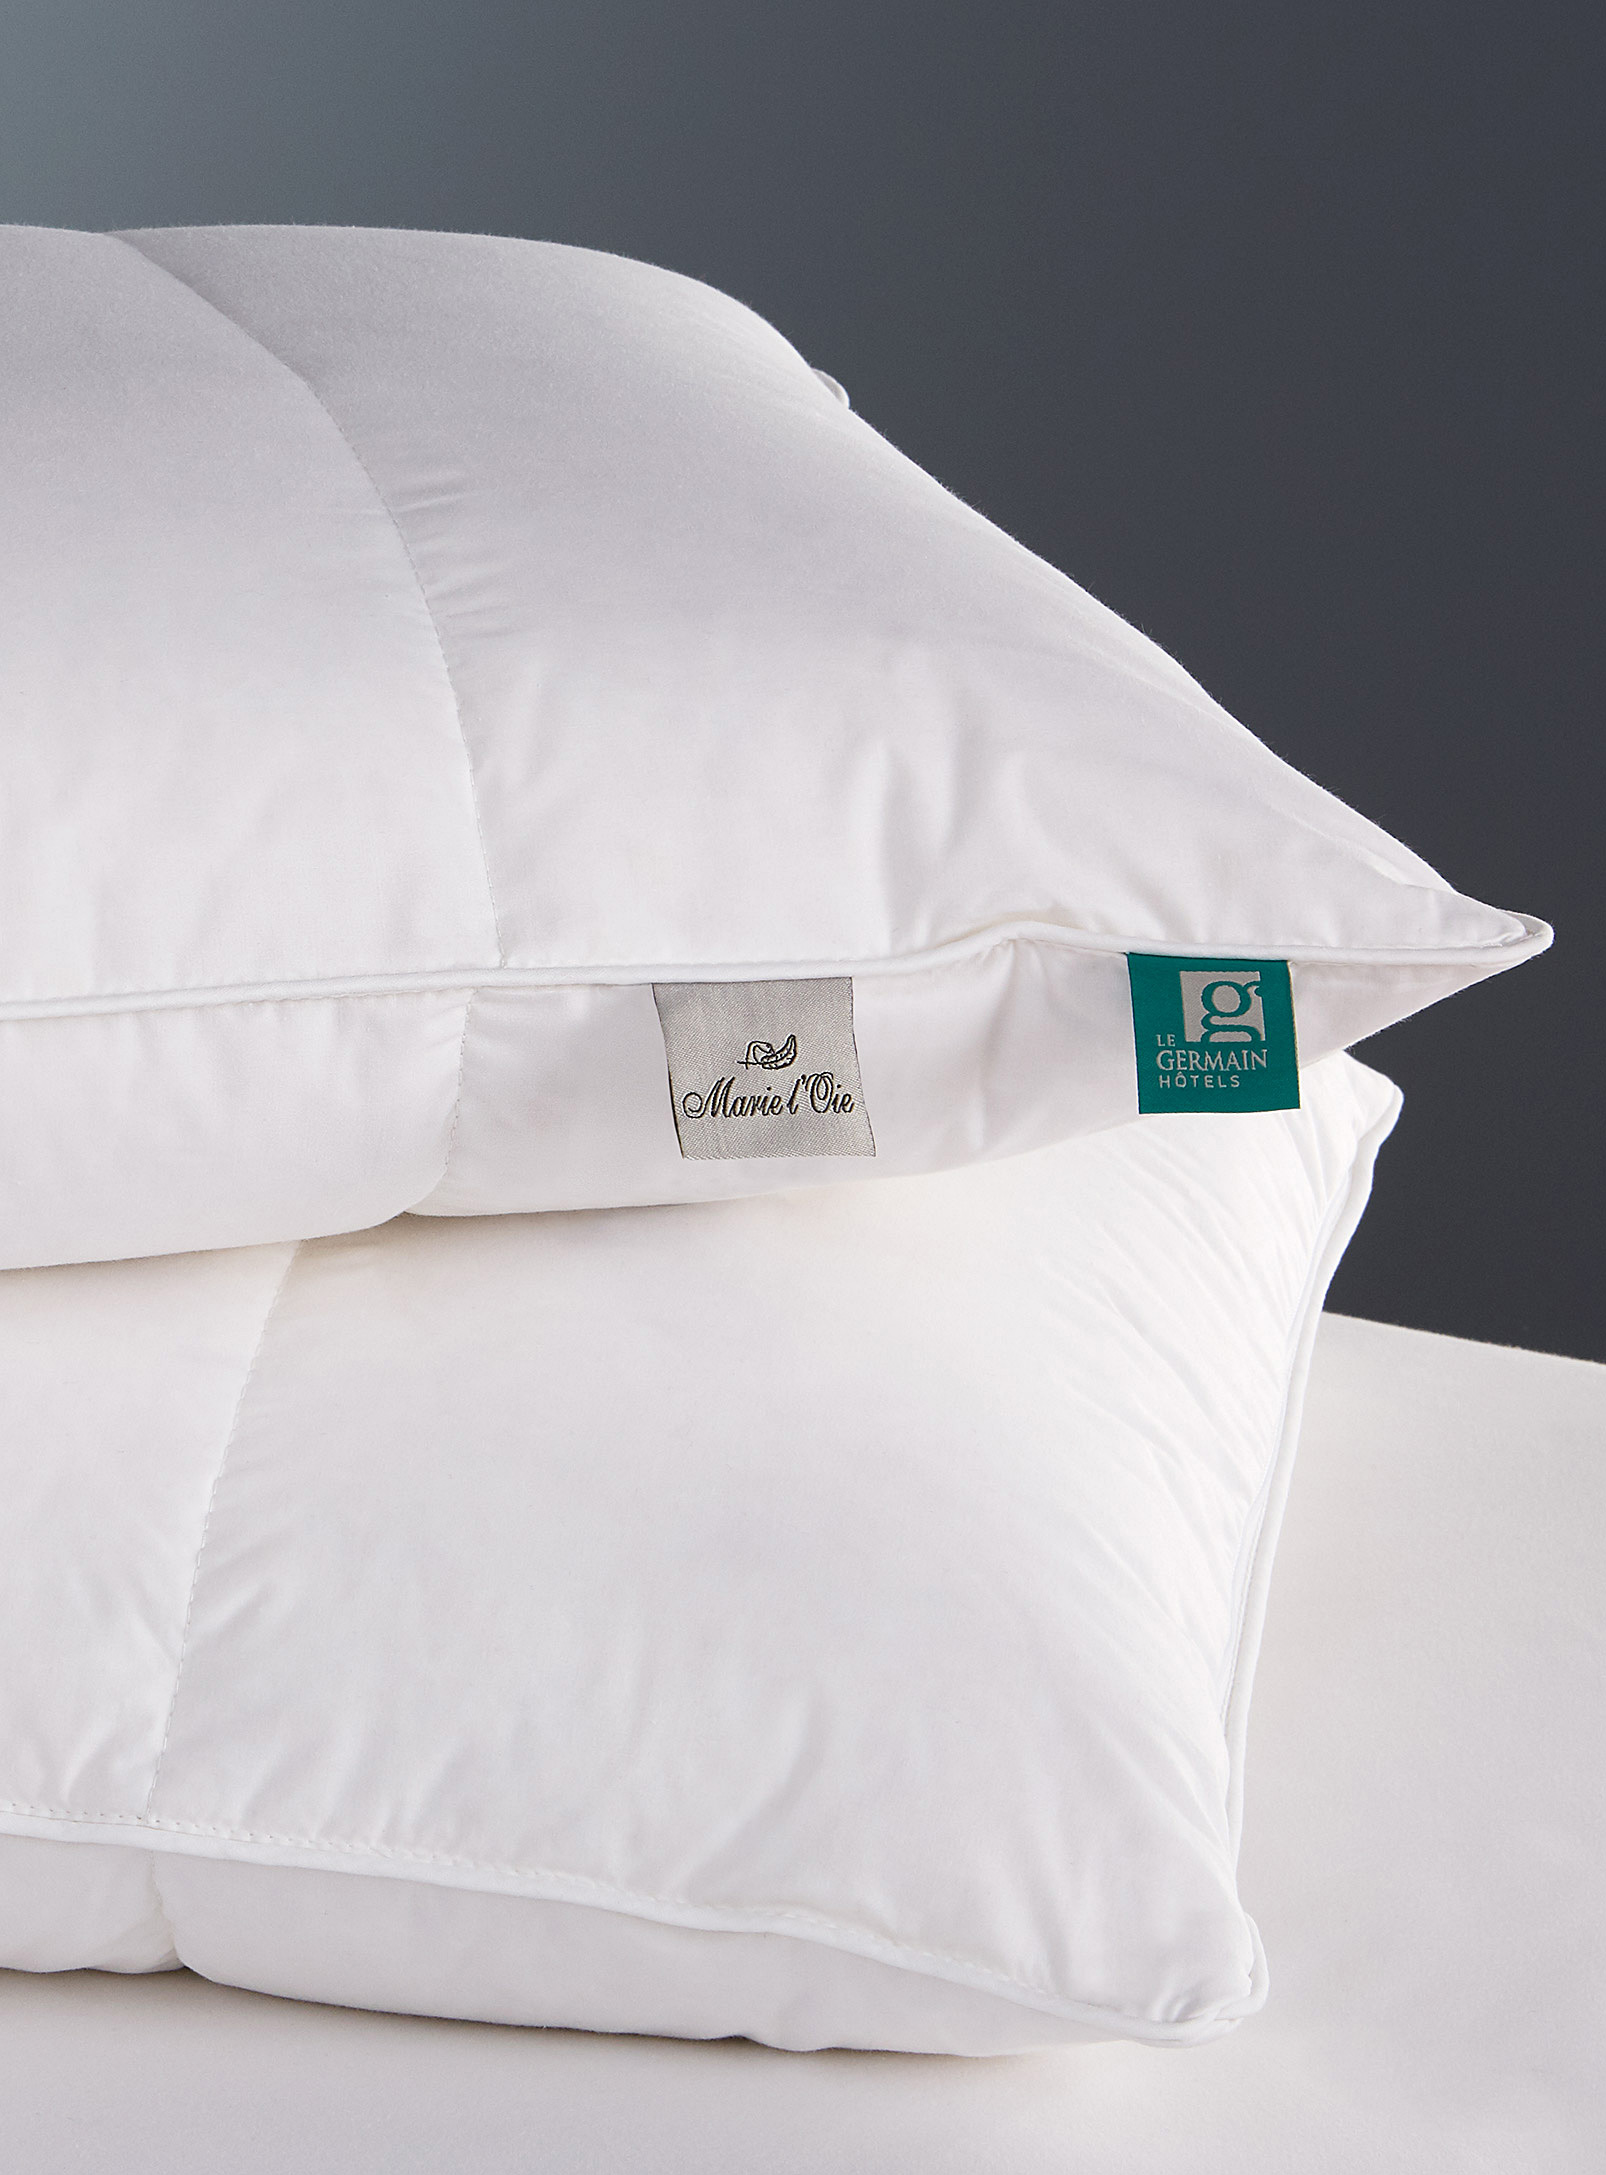 Hôtels Le Germain - Royal Plus feather and down pillow Firm support